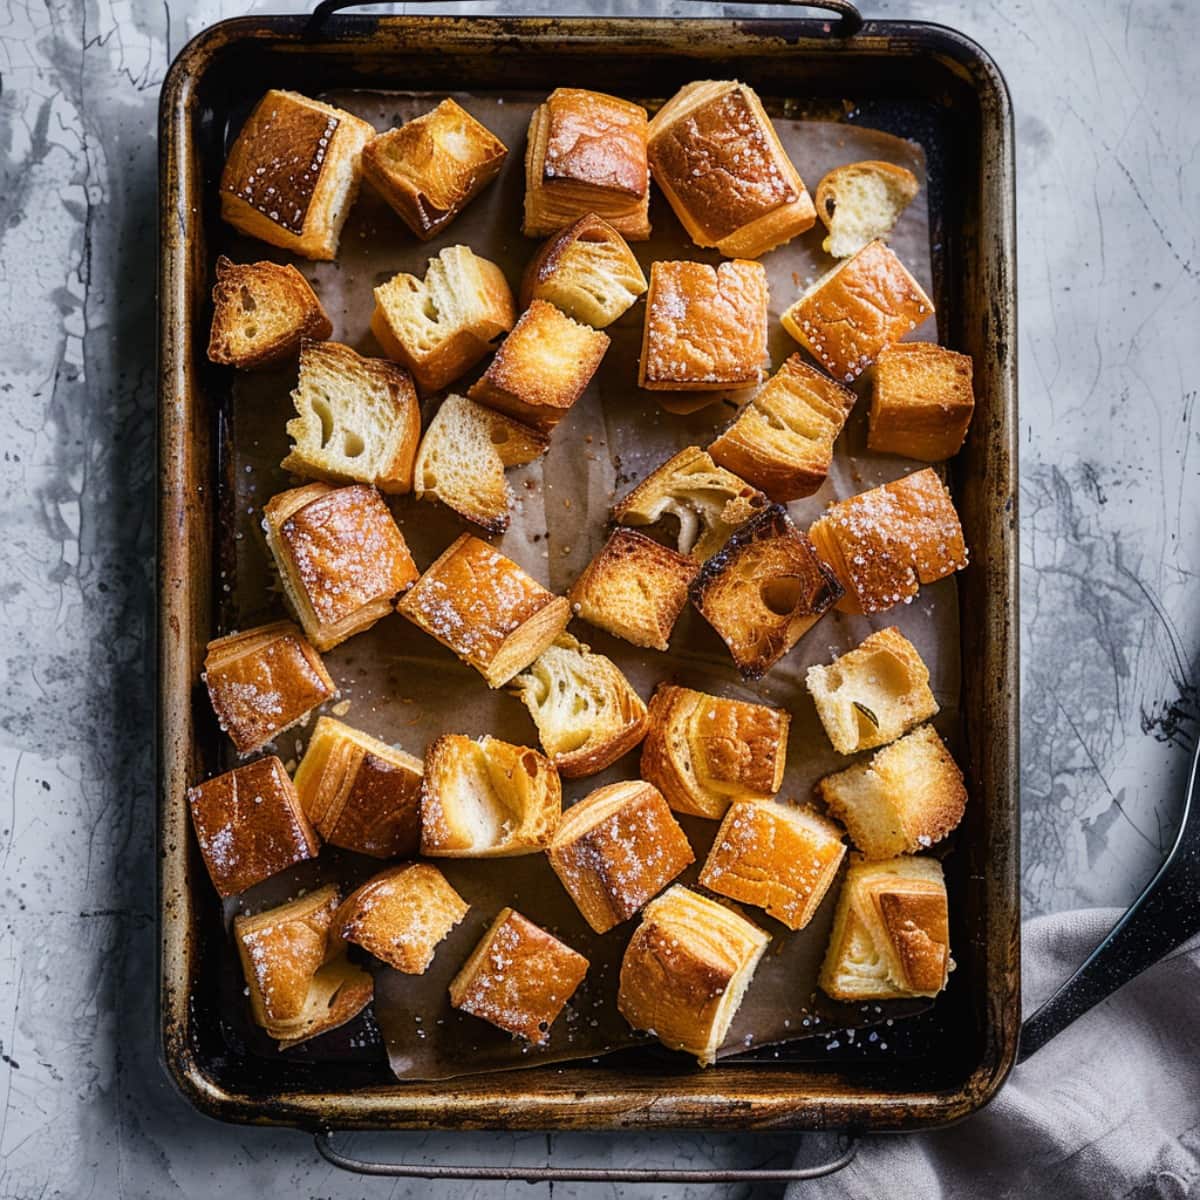 Cubed croissants on a baking tray